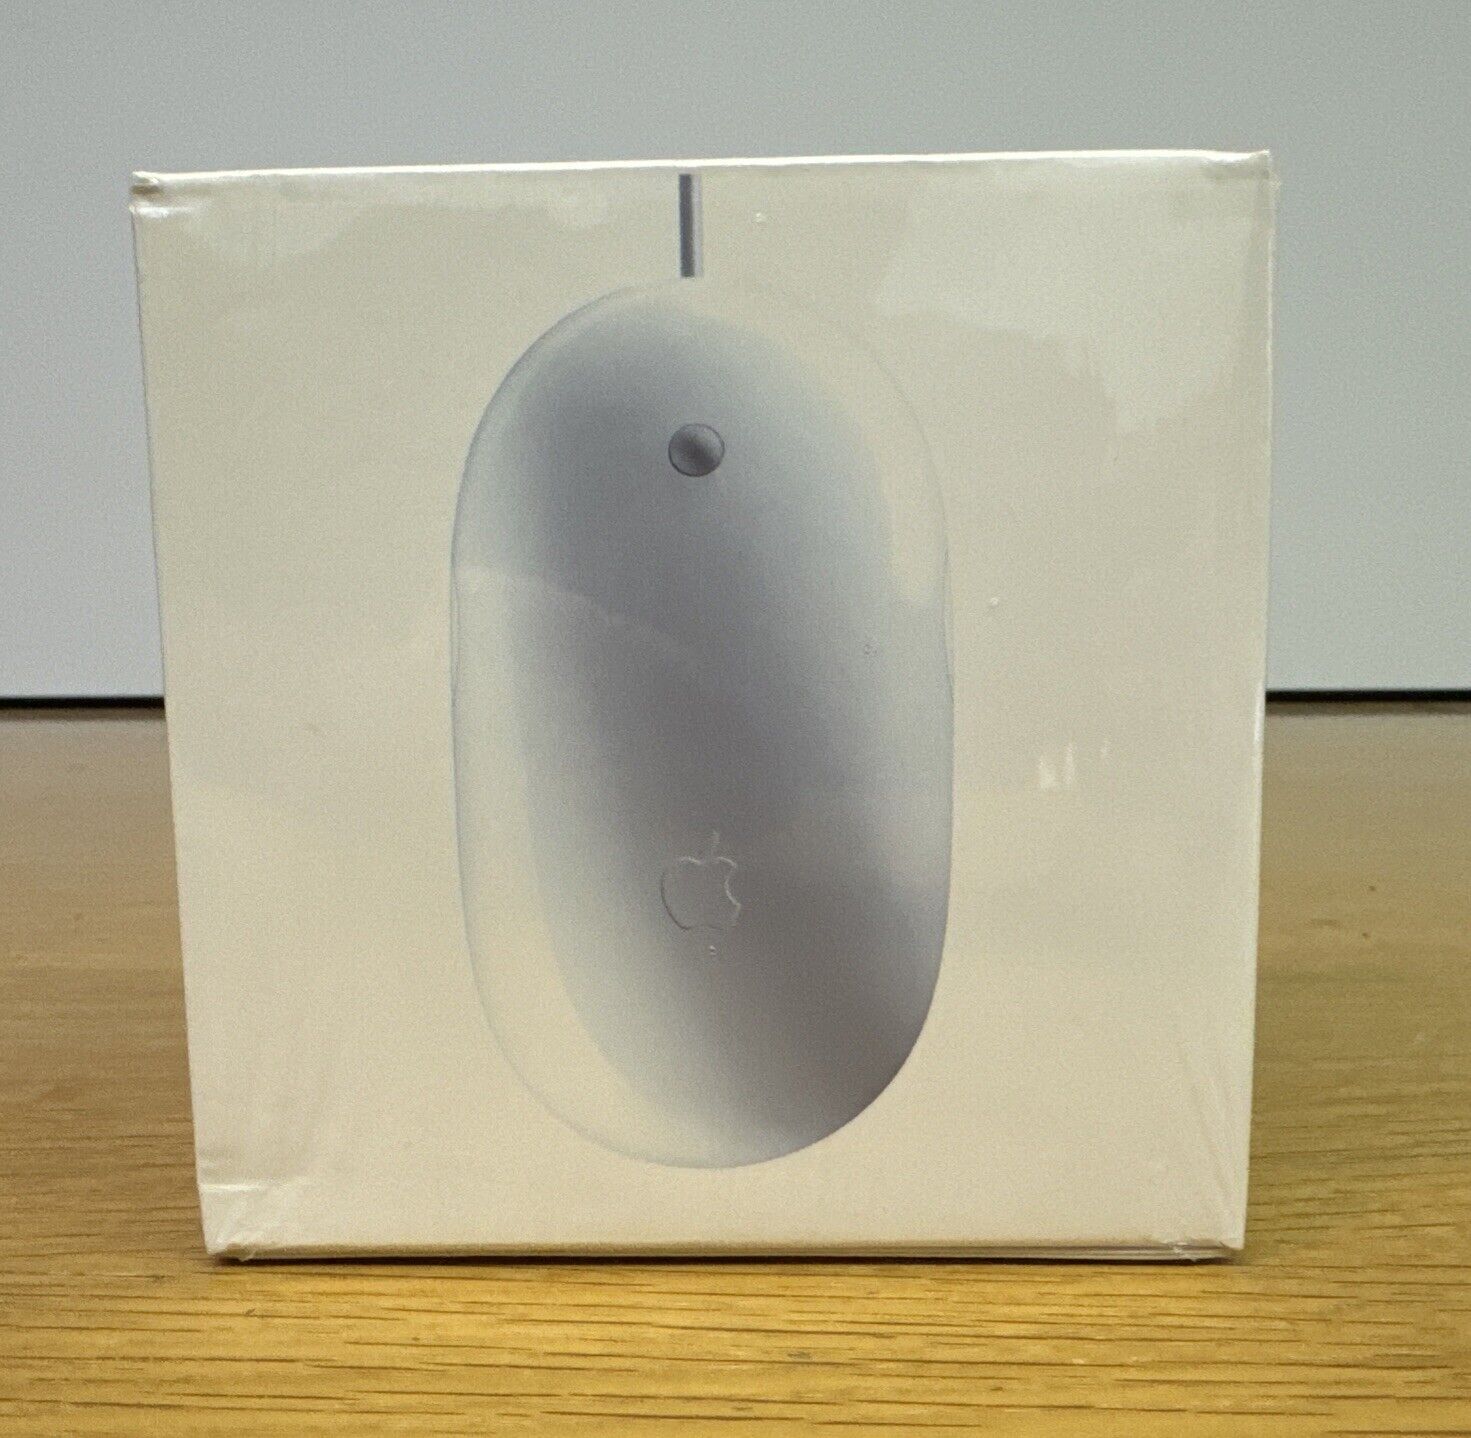 Vintage Apple Mighty Mouse Wired White Model A1152 MB112LL/A  SEALED in Box 2007